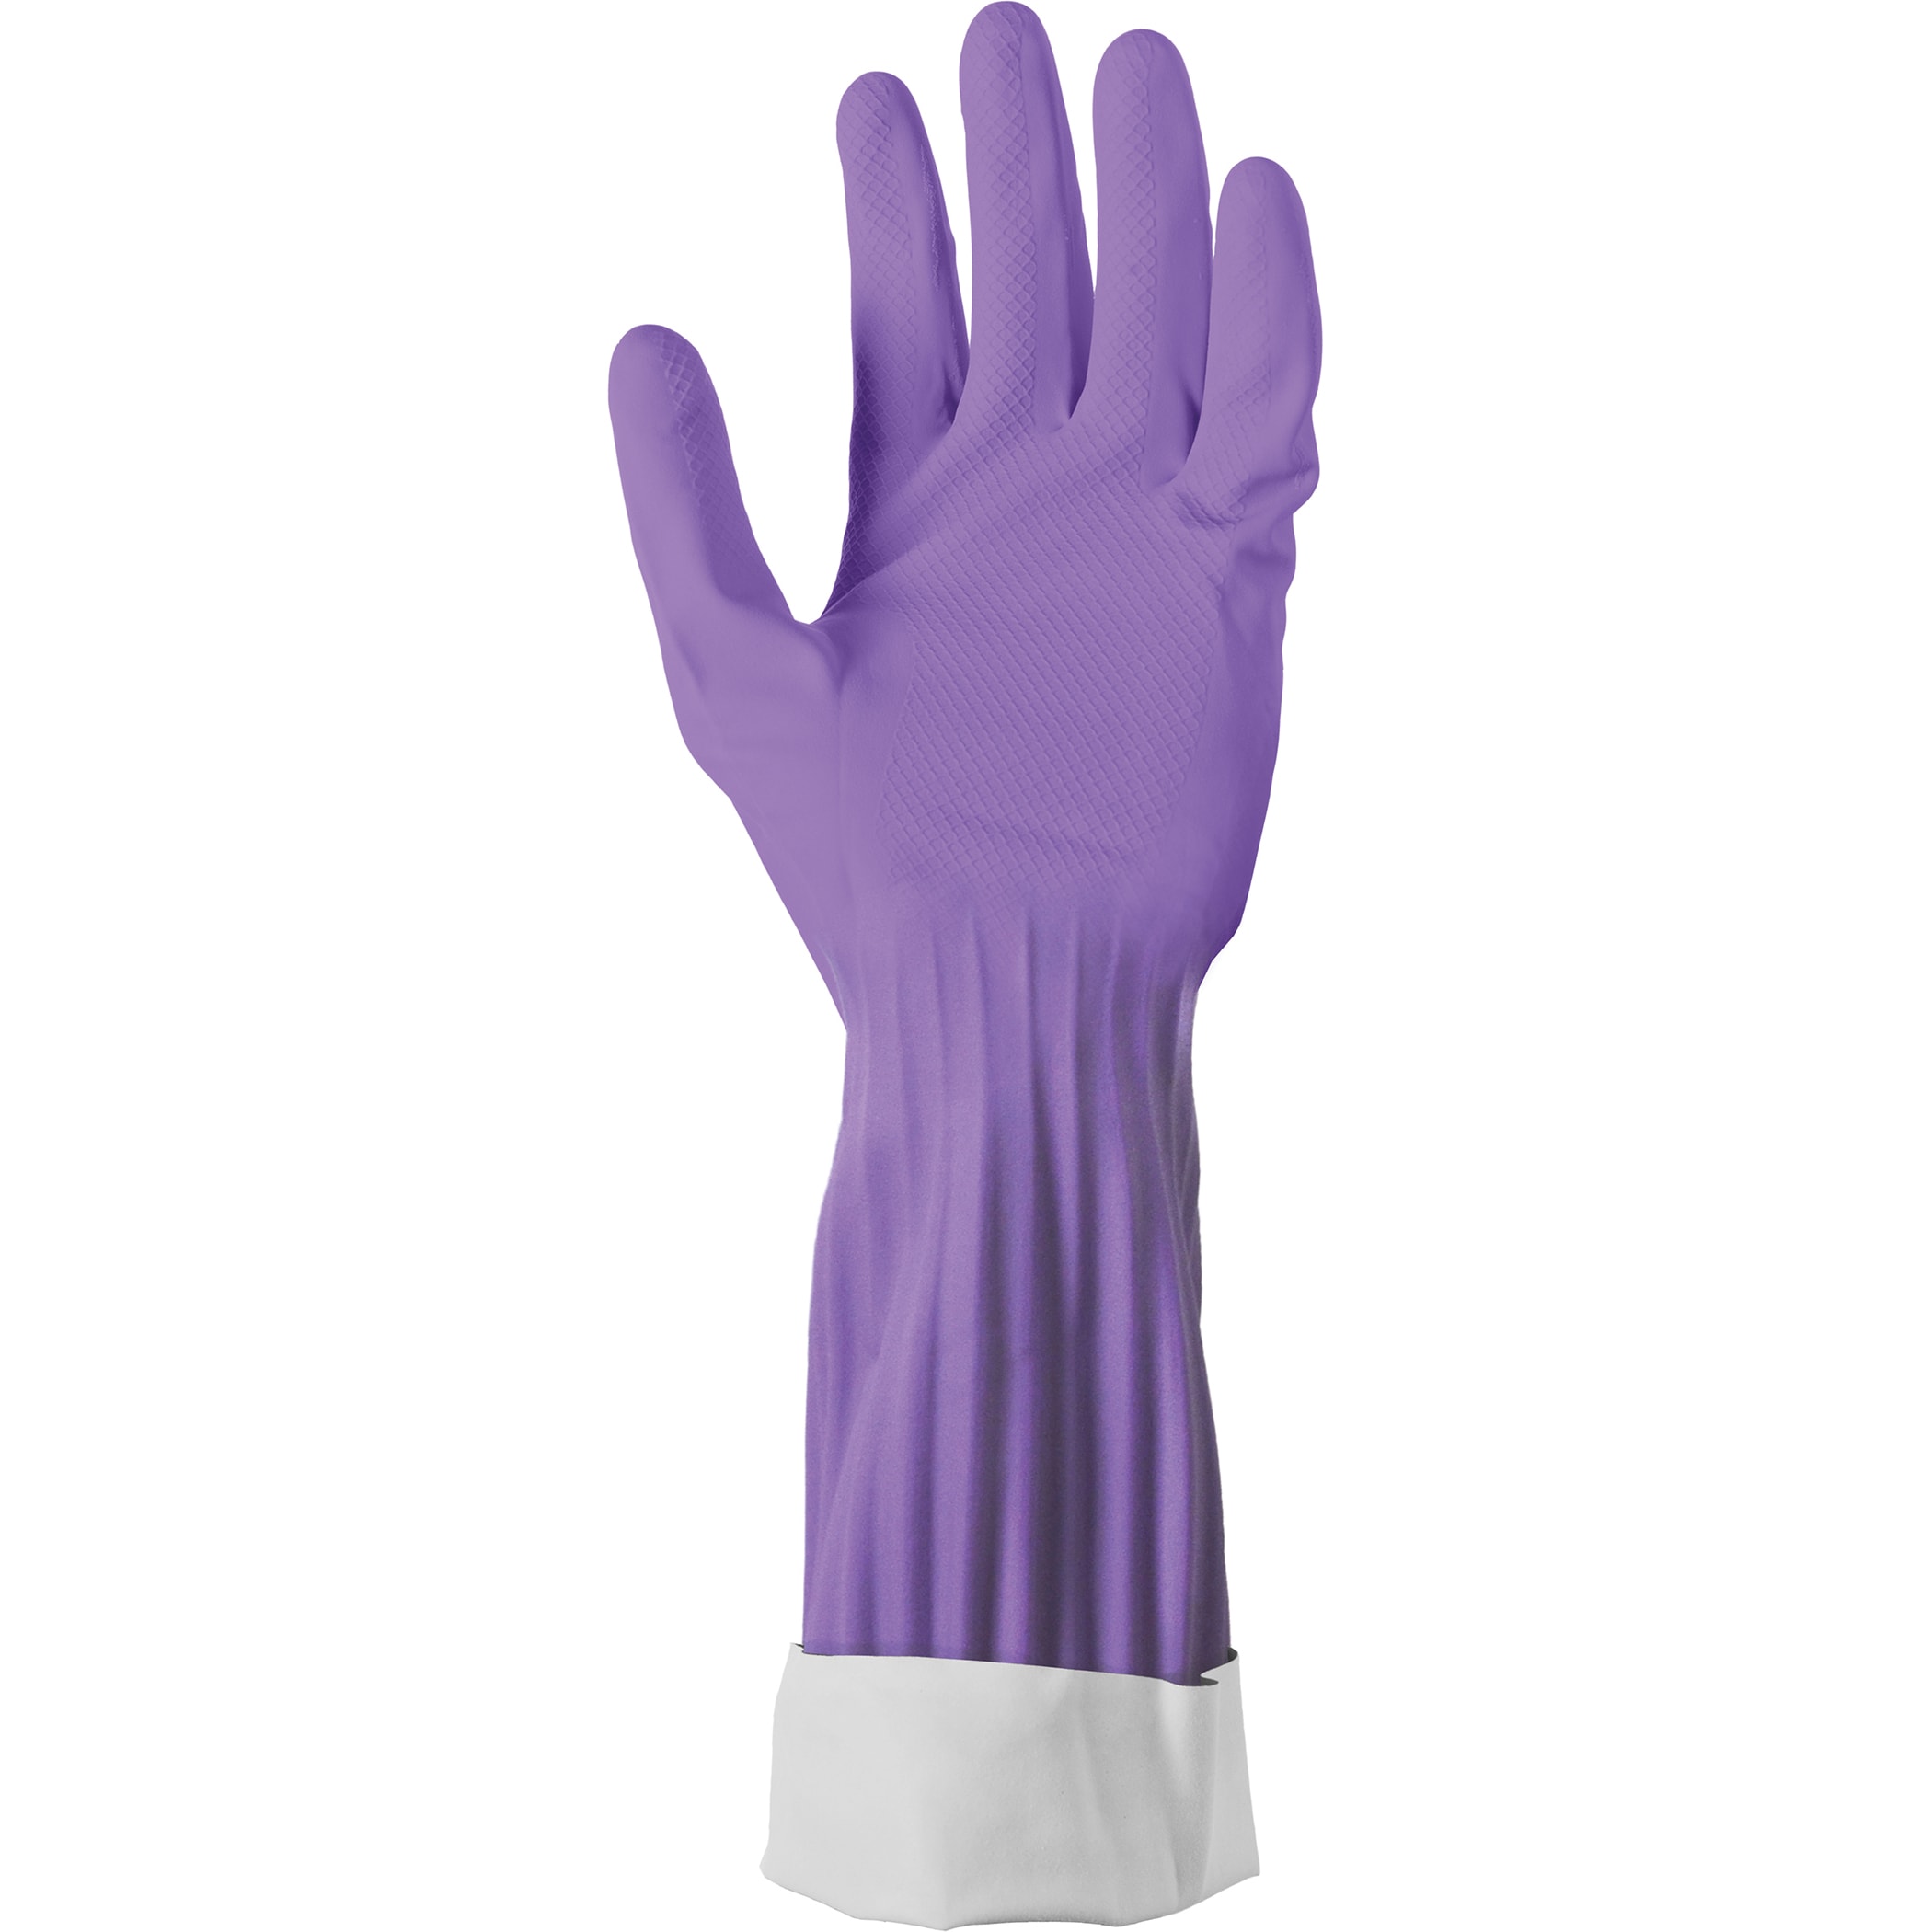 ribbed rubber gloves